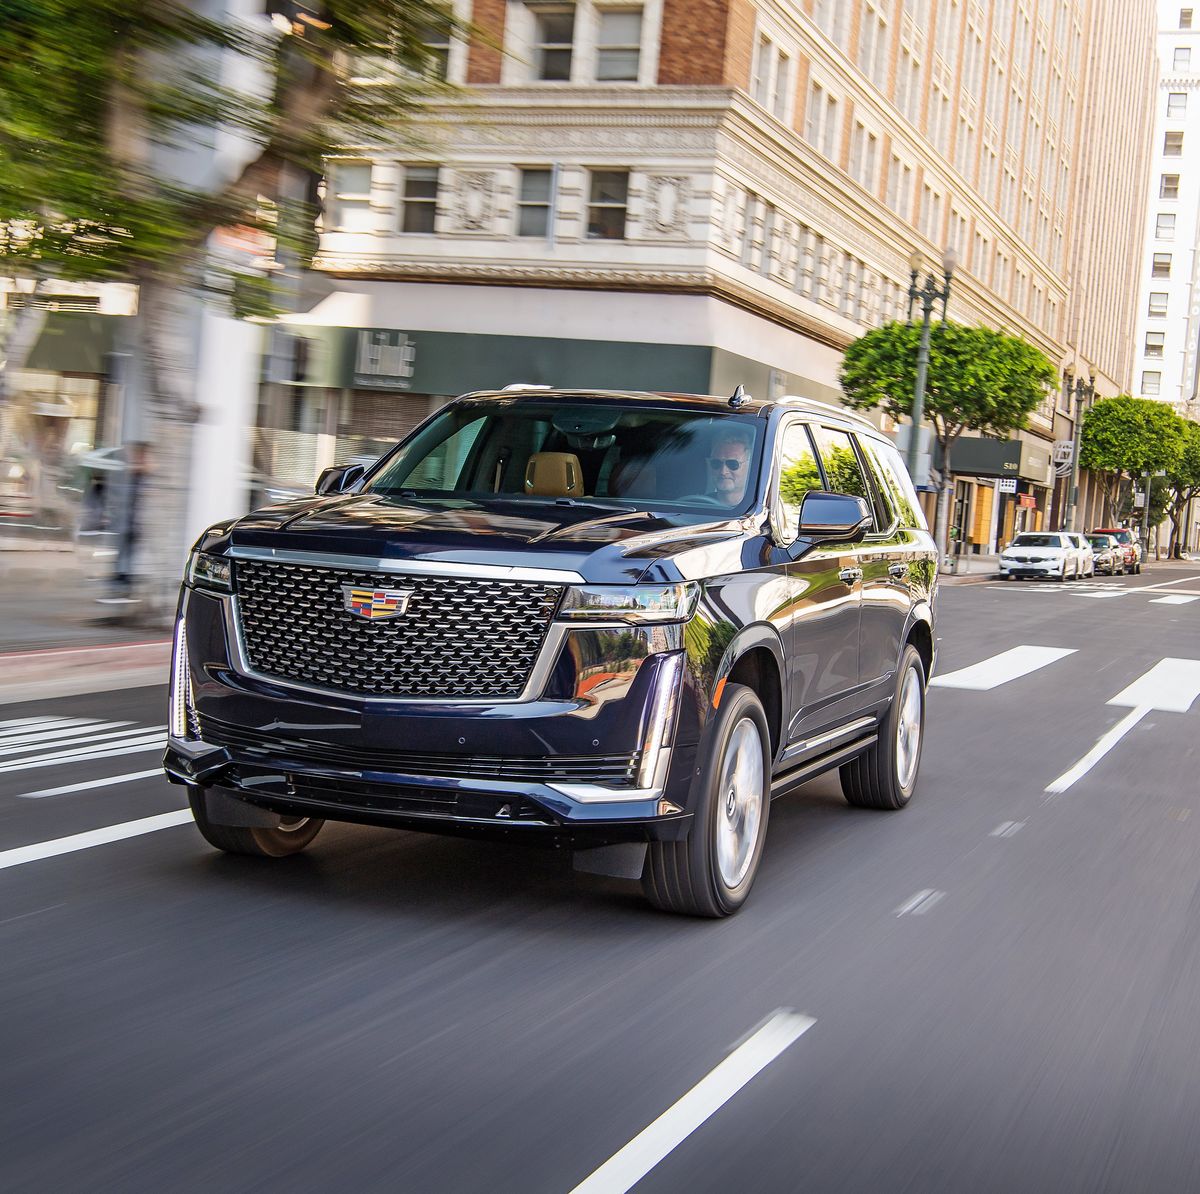 The Cadillac Escalade Stands Tall and Brings Spacious Refinement